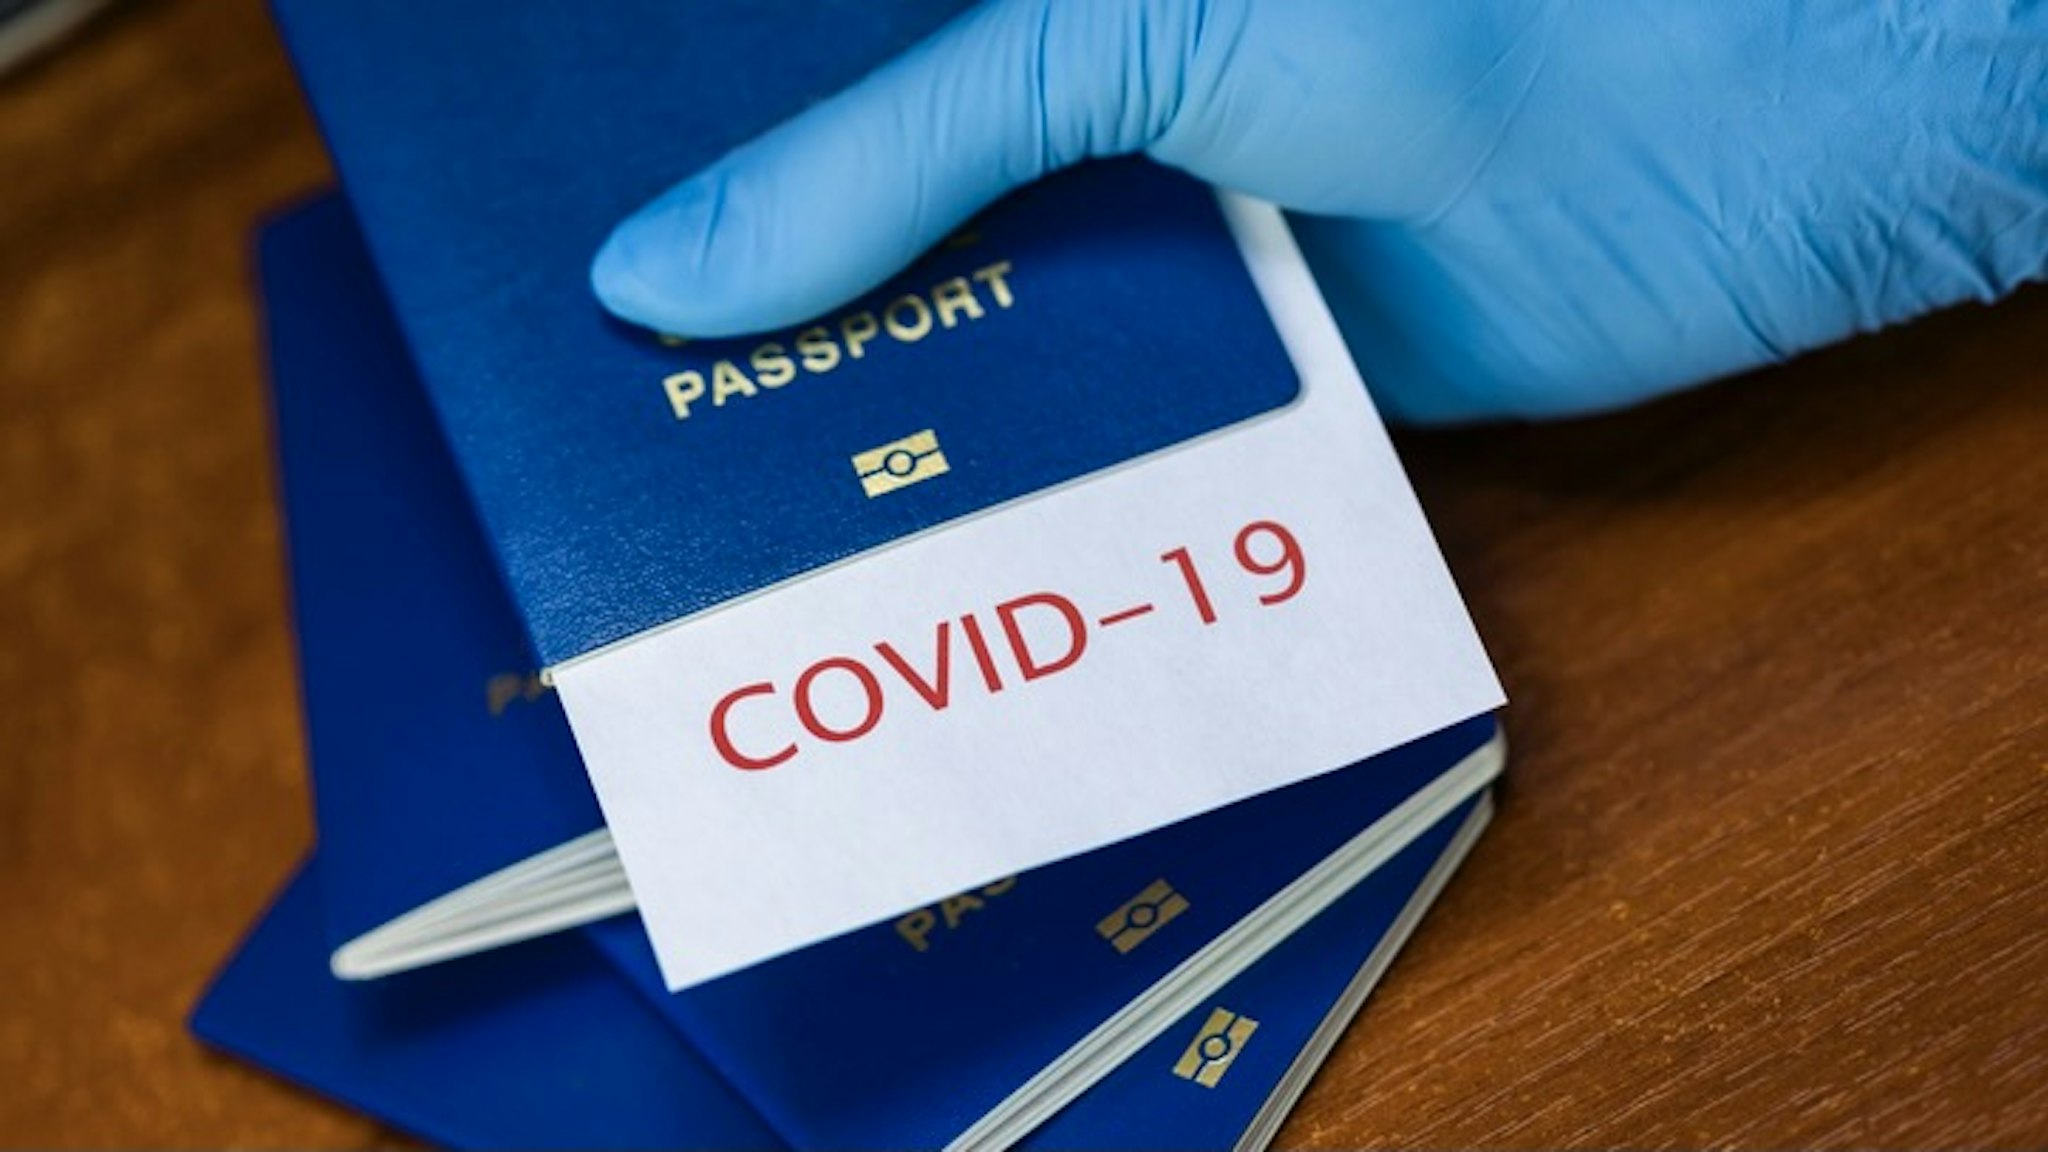 Immunity passport or risk-free certificate concept. Traveling After the Coronavirus Pandemic - stock photo Man holding a passport with COVID-19 sign stamped onto a white paper, immunity passport or risk-free certificate concept, recovered Coronavirus COVID19 patients being issued proof of convalescence Anton Petrus via Getty Images